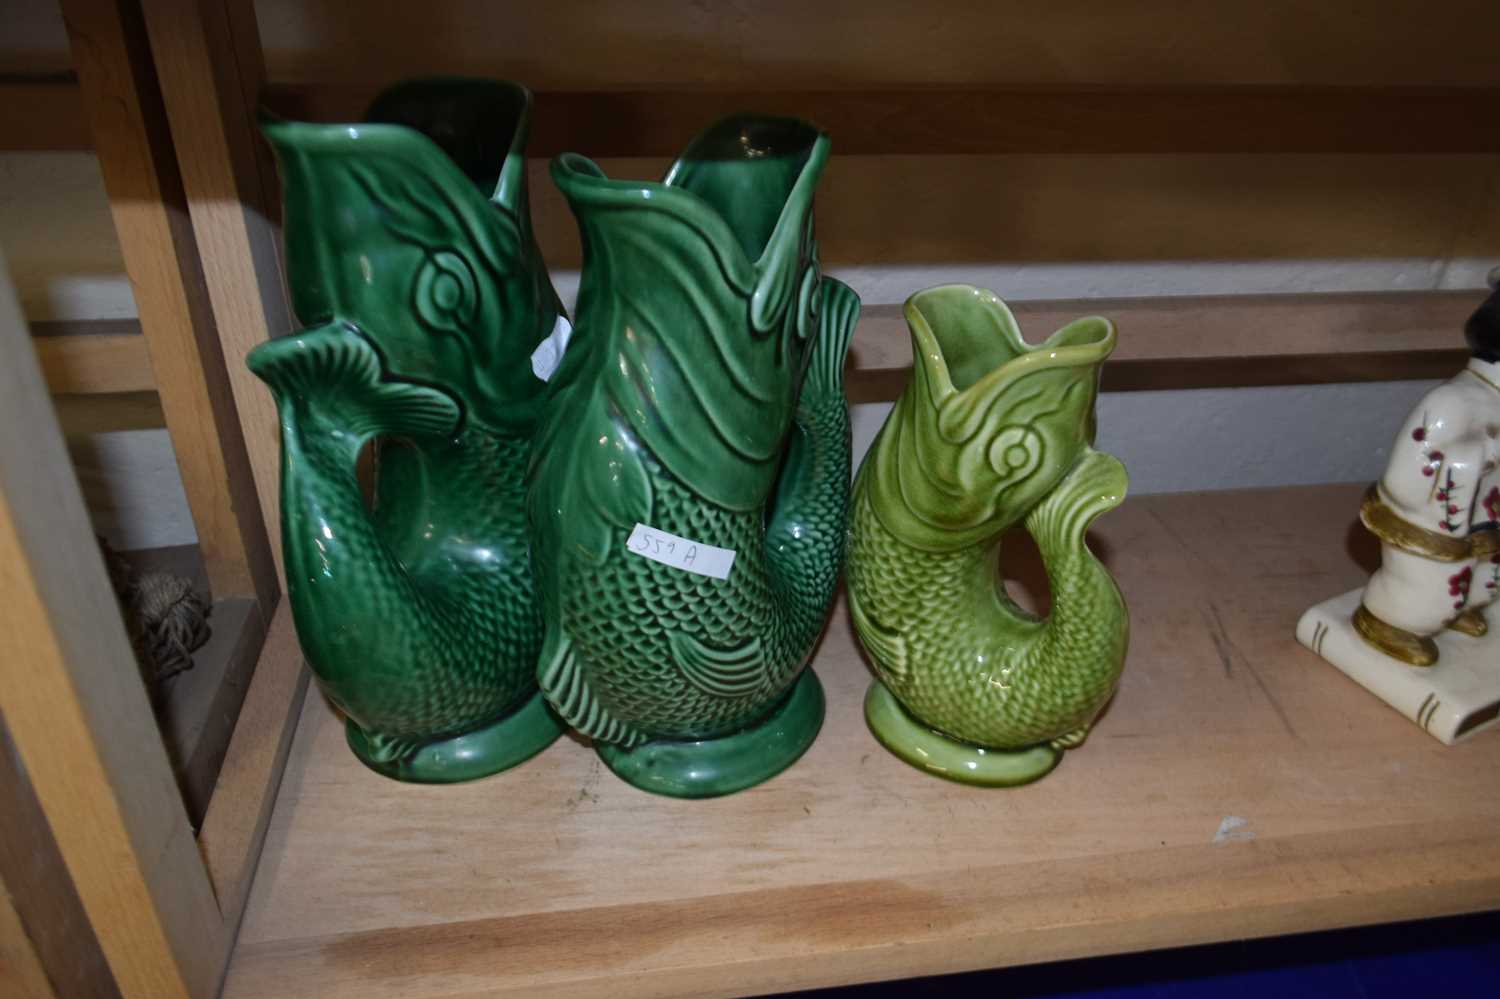 Two green glazed Dartmouth Pottery fish vases and another smaller